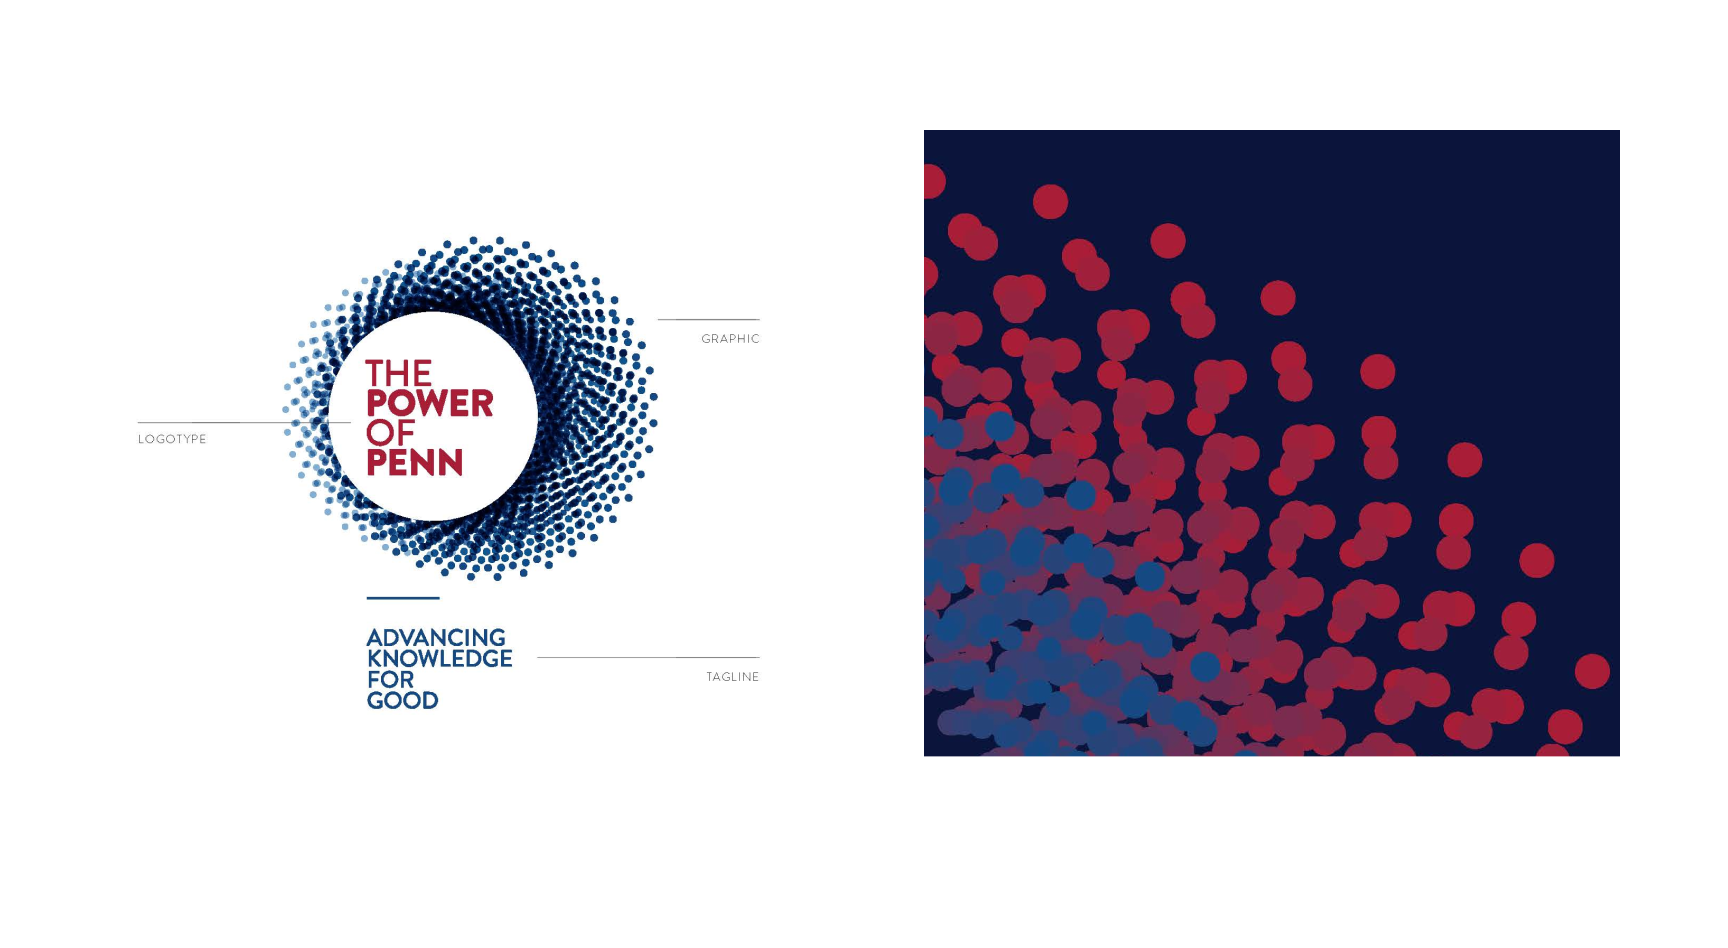 A graphic lockup with the Power of Penn logo in vertical format on the left, and a detail of the stippled dots in the logo on the right.